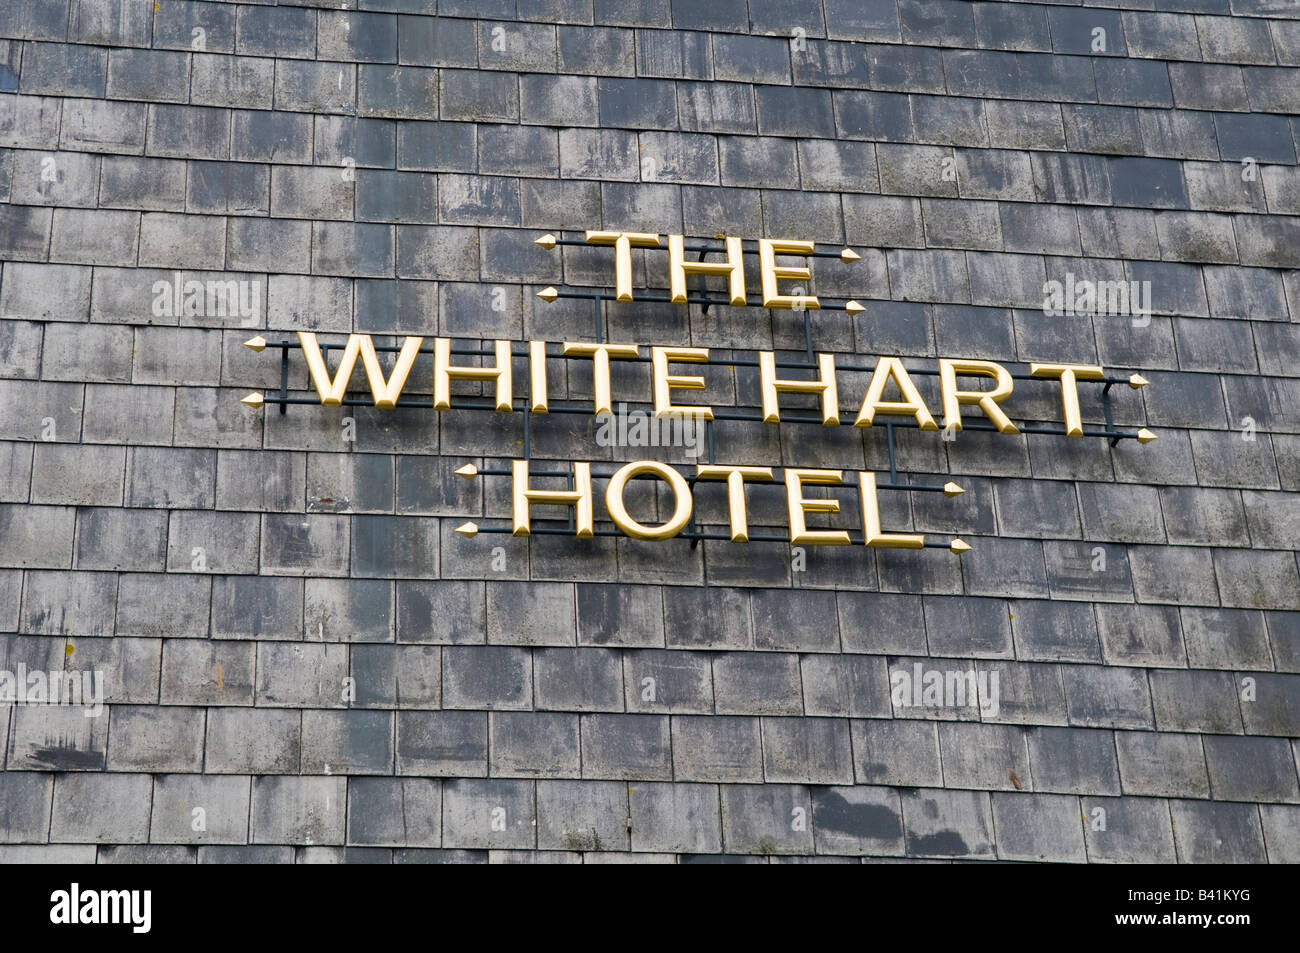 The White Hart Hotel sign, St Austell, Cornwall Stock Photo